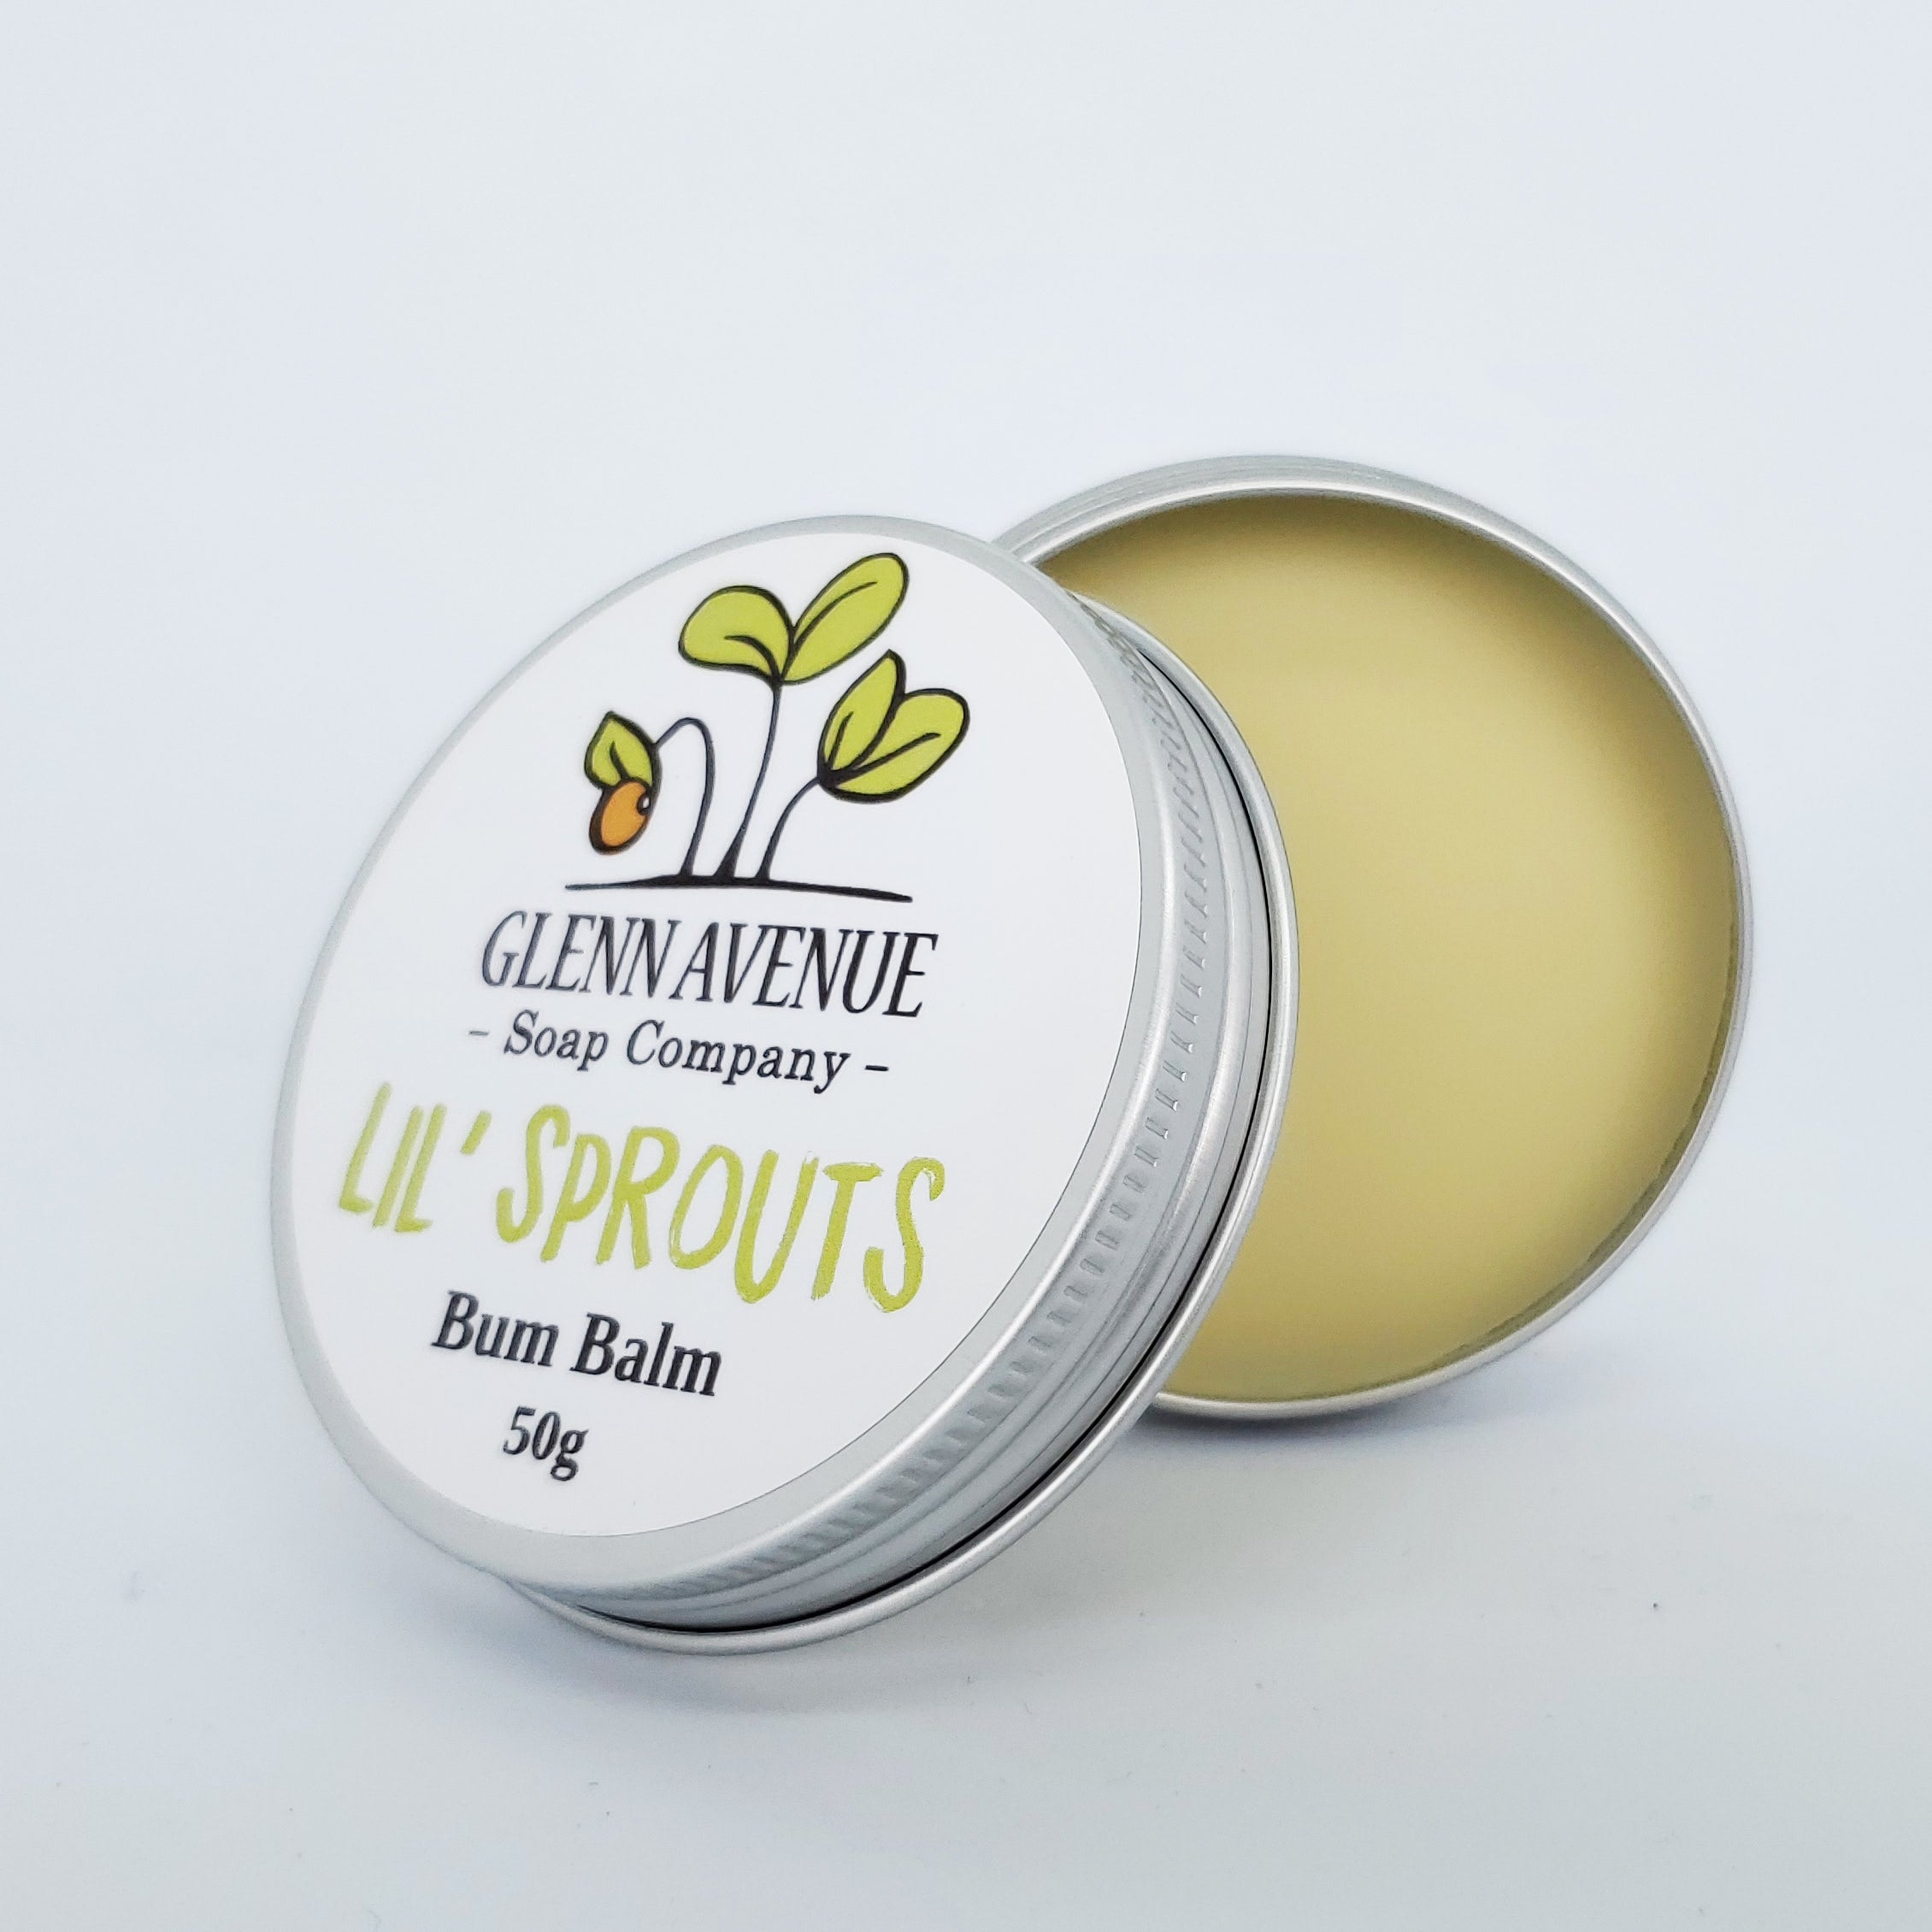 Lil' Sprouts Bum Balm